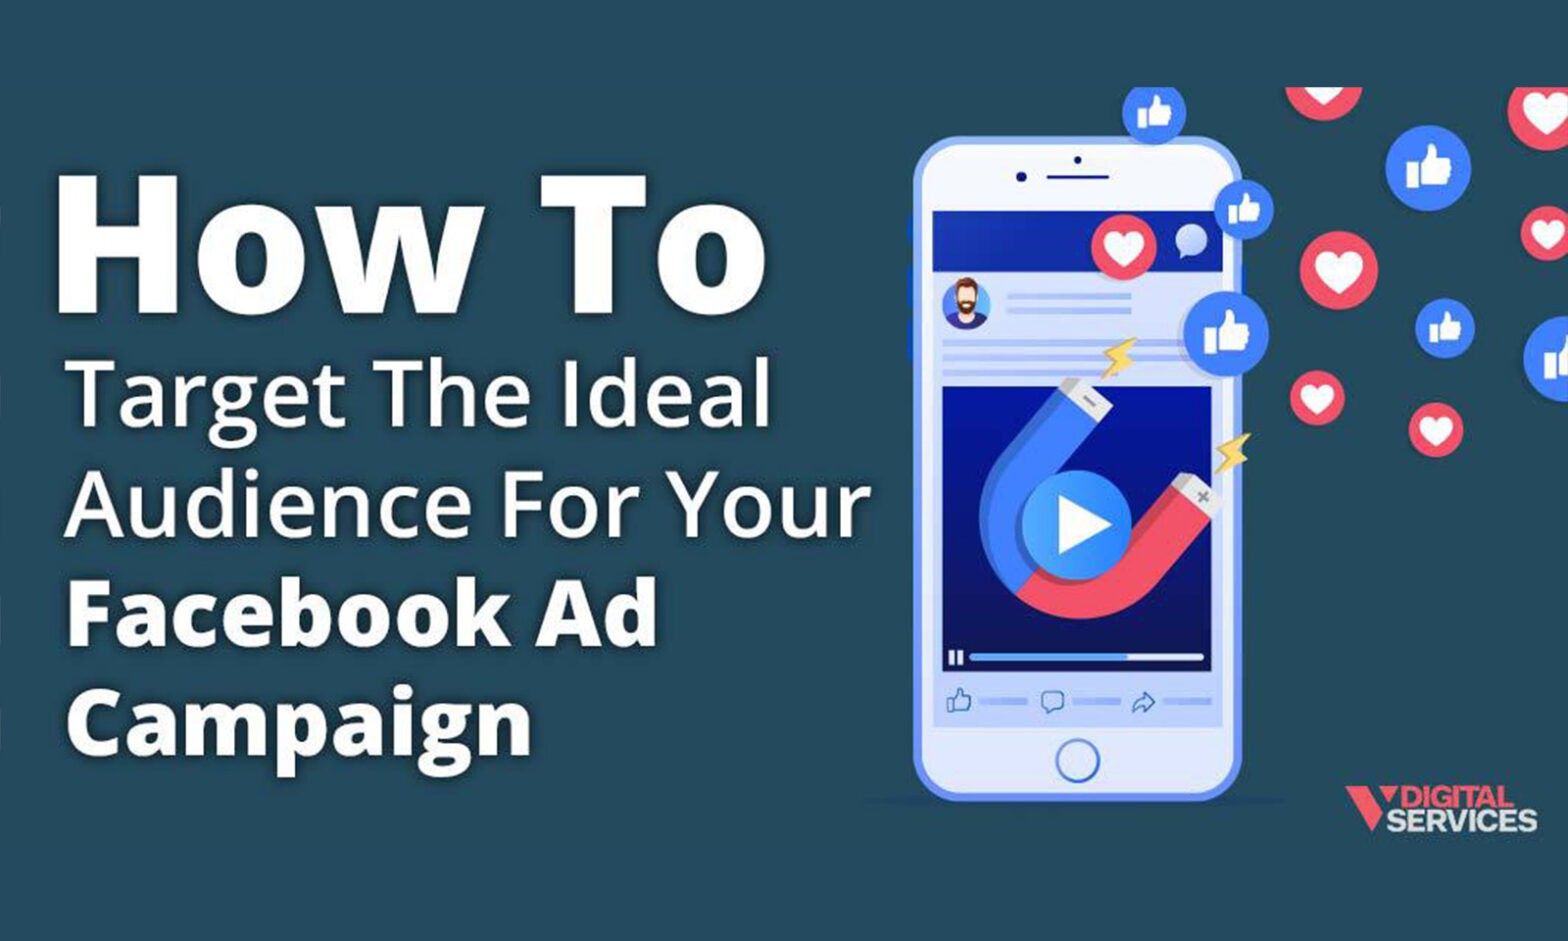 How to Target the Ideal Audience for Your Facebook Ad Campaign